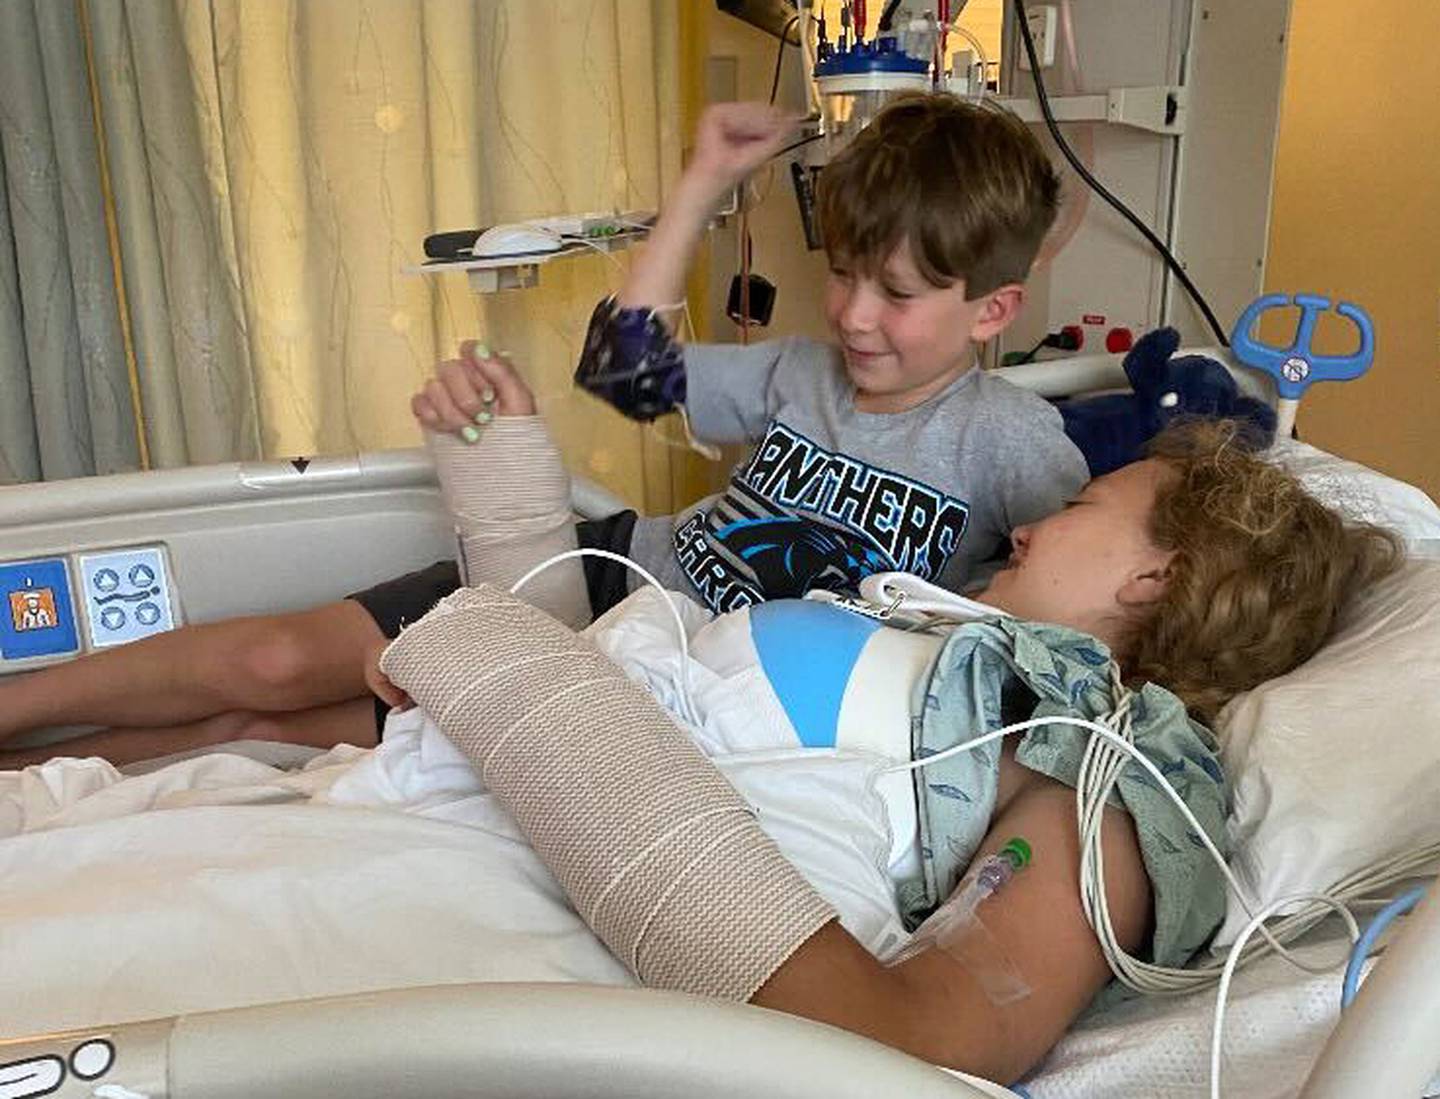 Silas Mitchell visits his sister Jasper Fidler for the first time in the ICU after Jasper was hospitalized from a rock climbing accident. Silas and Jasper wrote a song together for the Sing Me a Story project. 